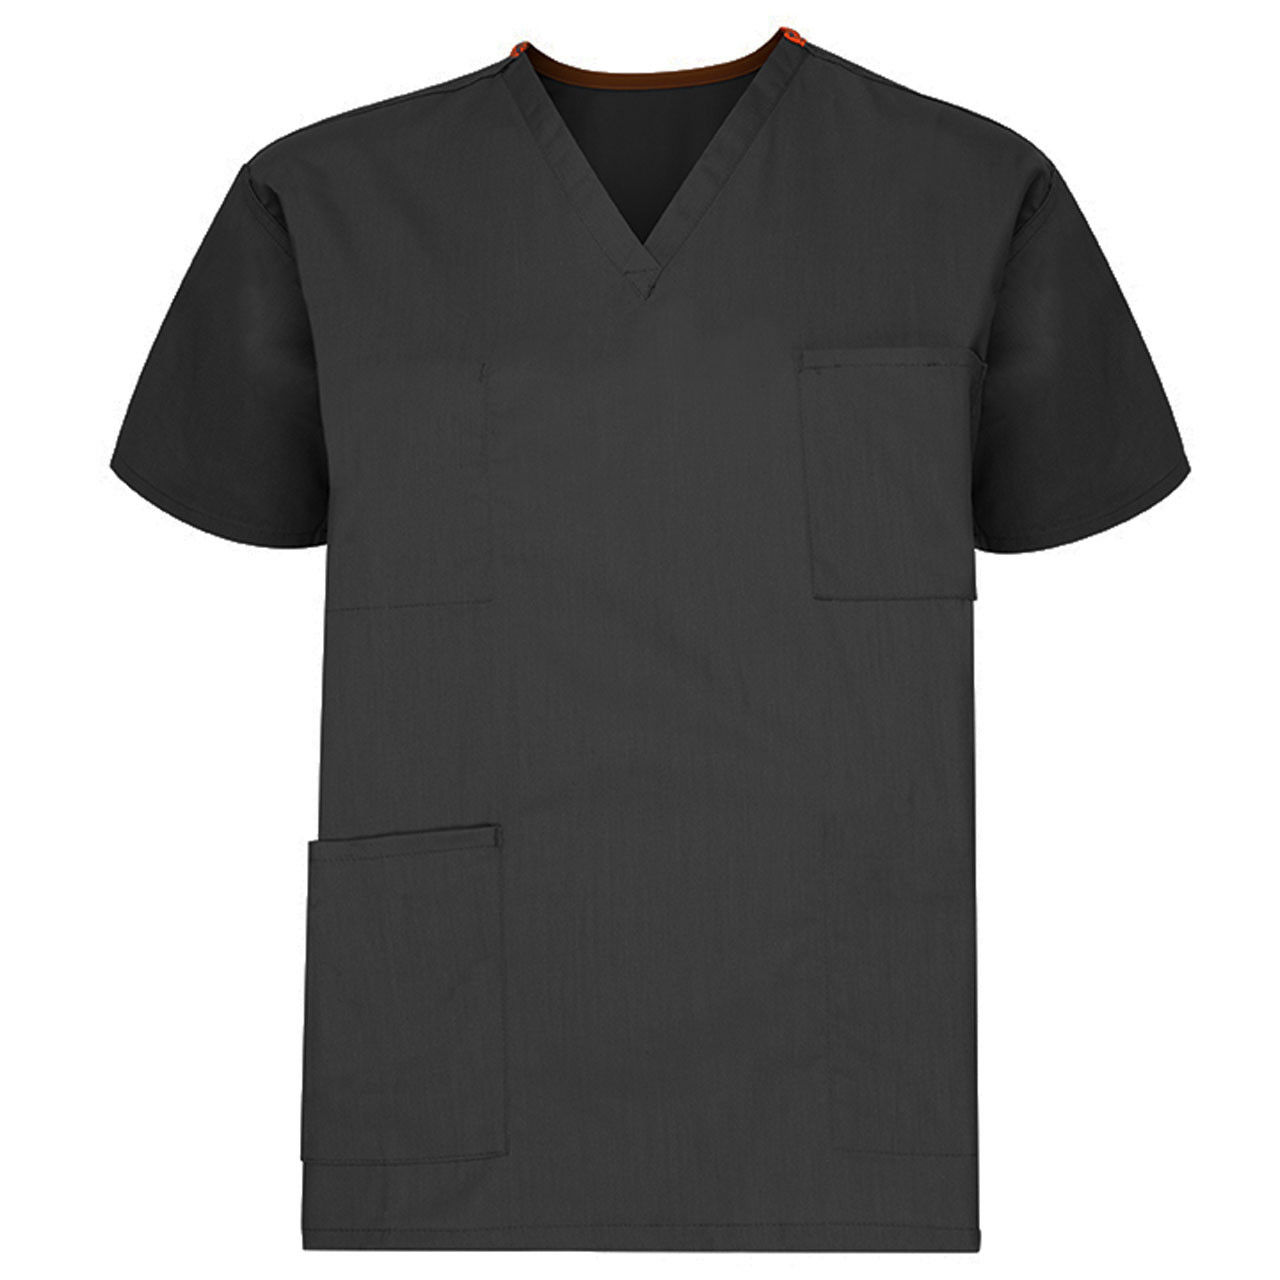 What are the features of these Unisex Reversible Scrubs in Black - Case of 24?